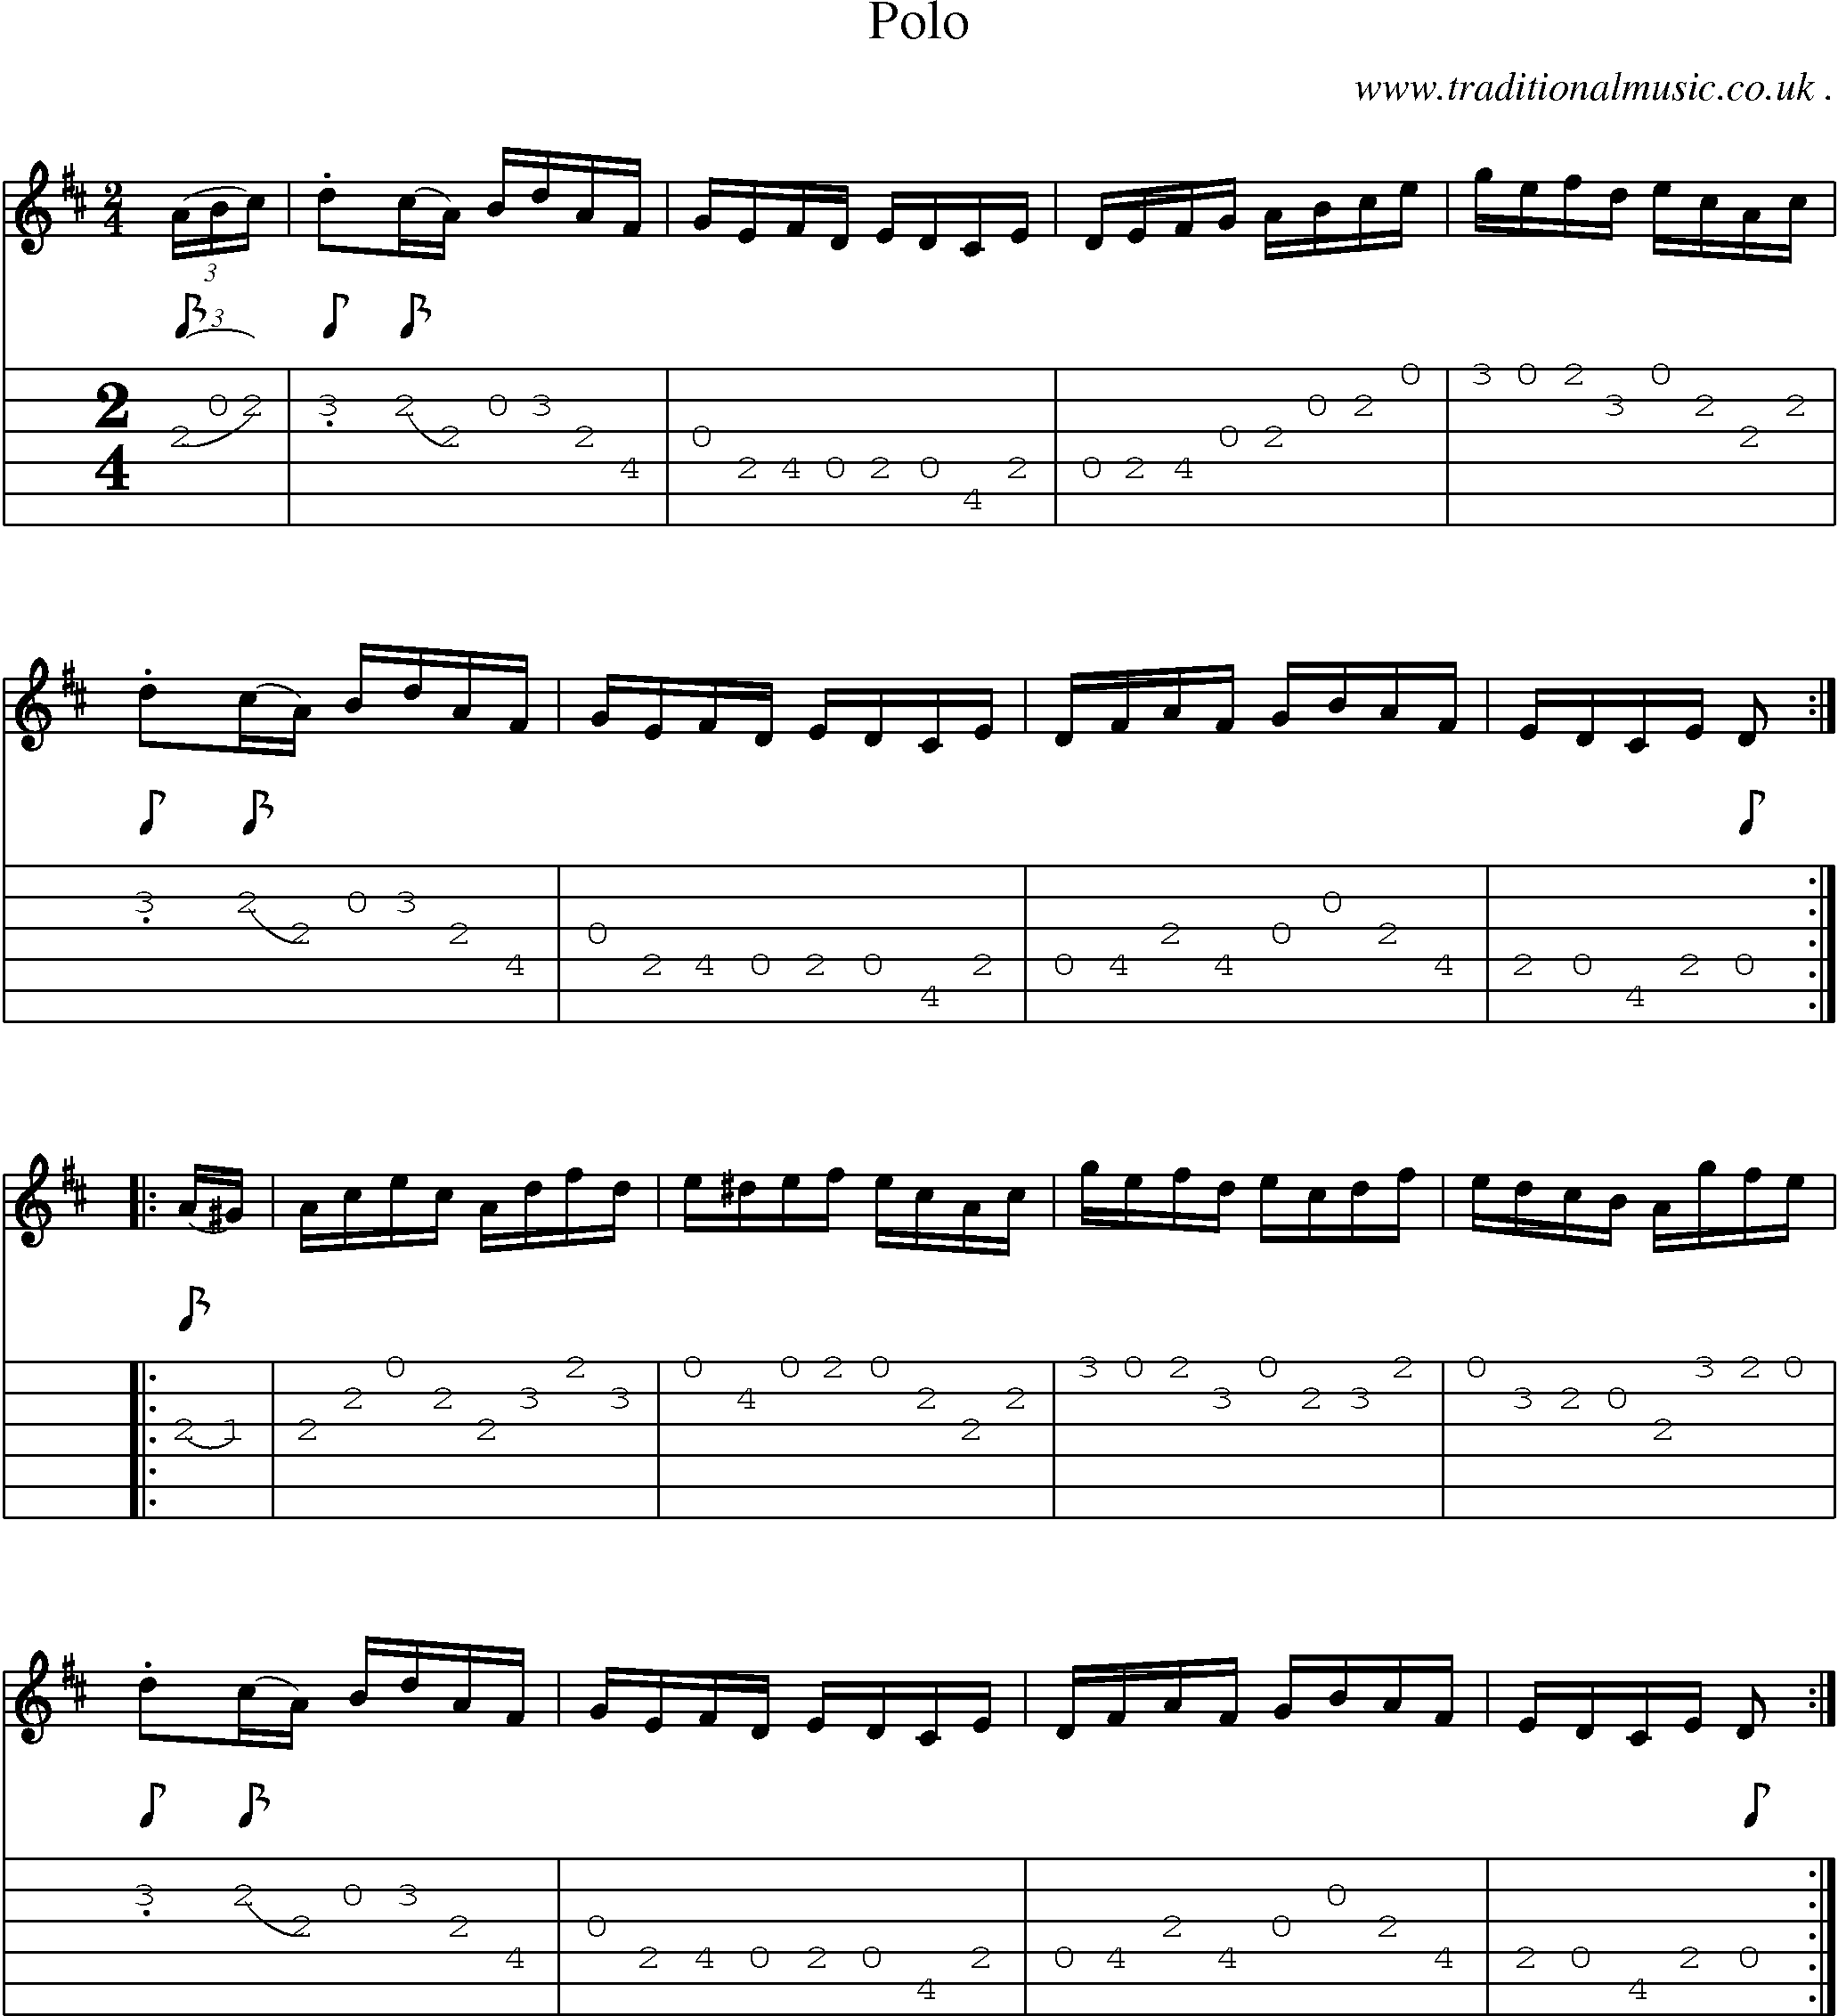 Sheet-Music and Guitar Tabs for Polo